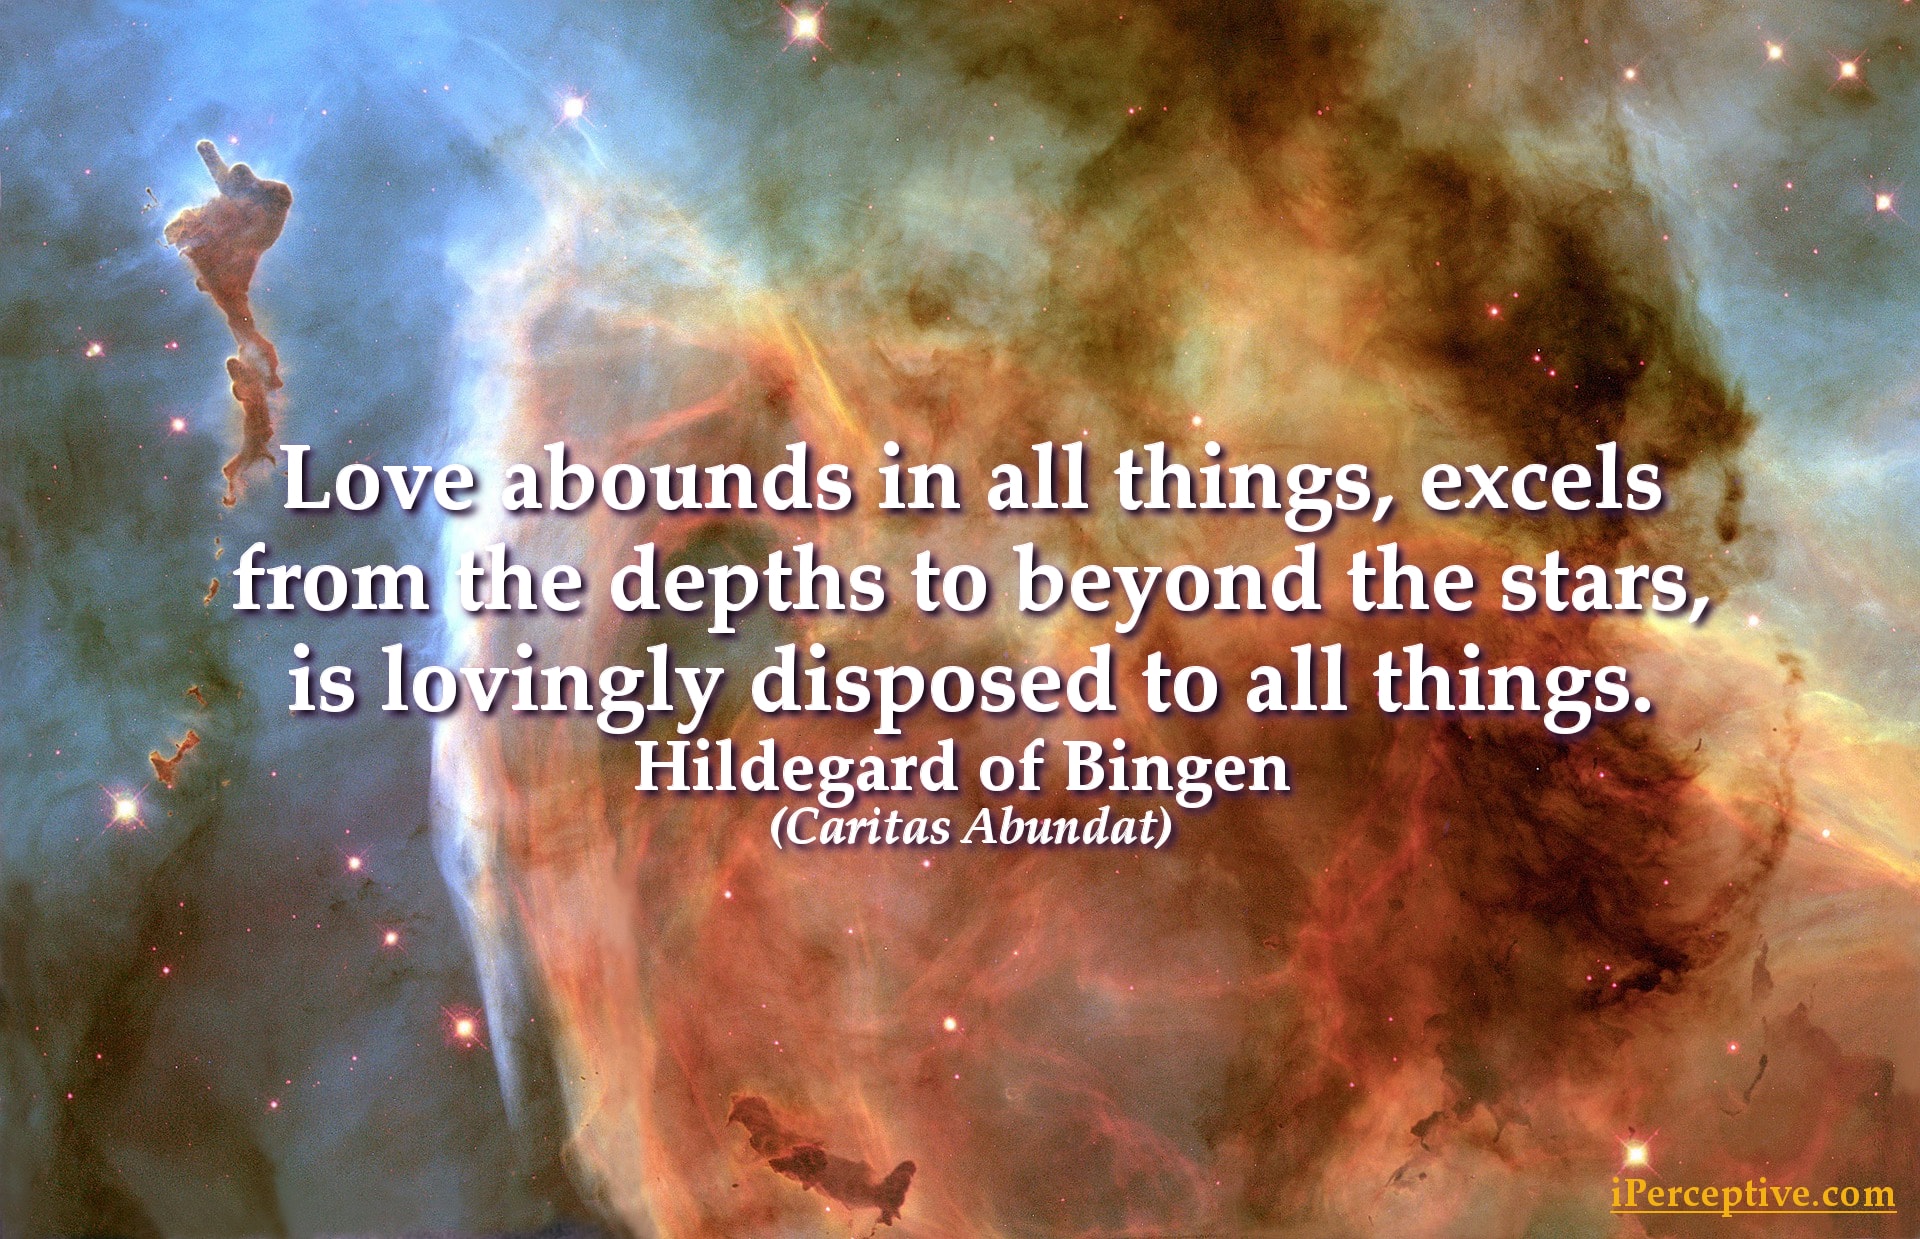 Hildegard von Bingen Quote: Love abounds in all things, excels from the depths to beyond the...